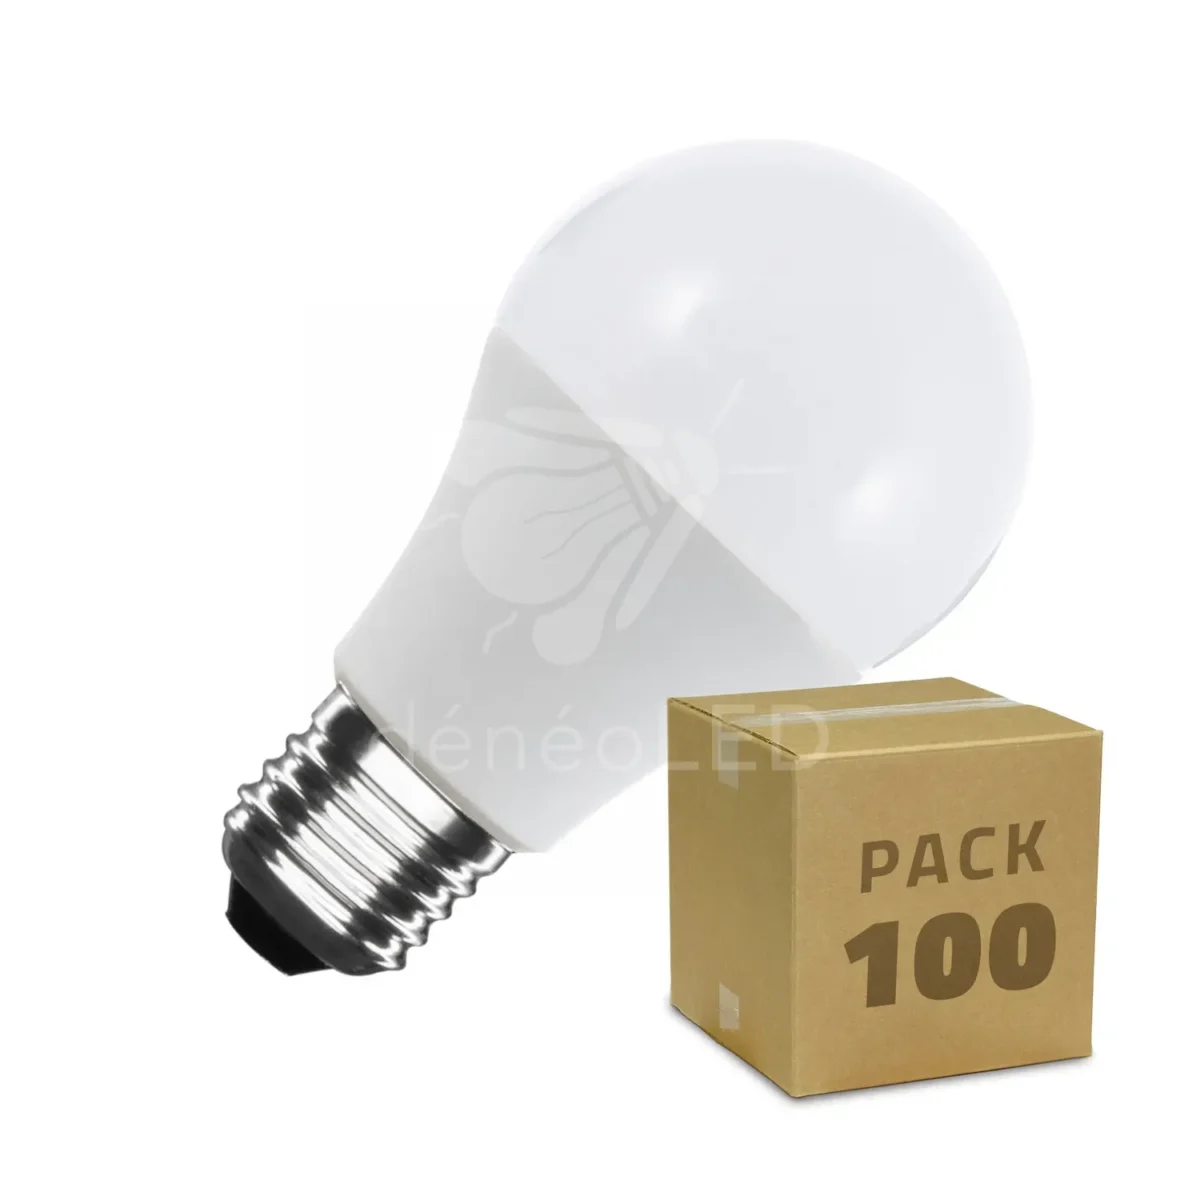 Pack 100 ampoules E27 A60 12 Watts